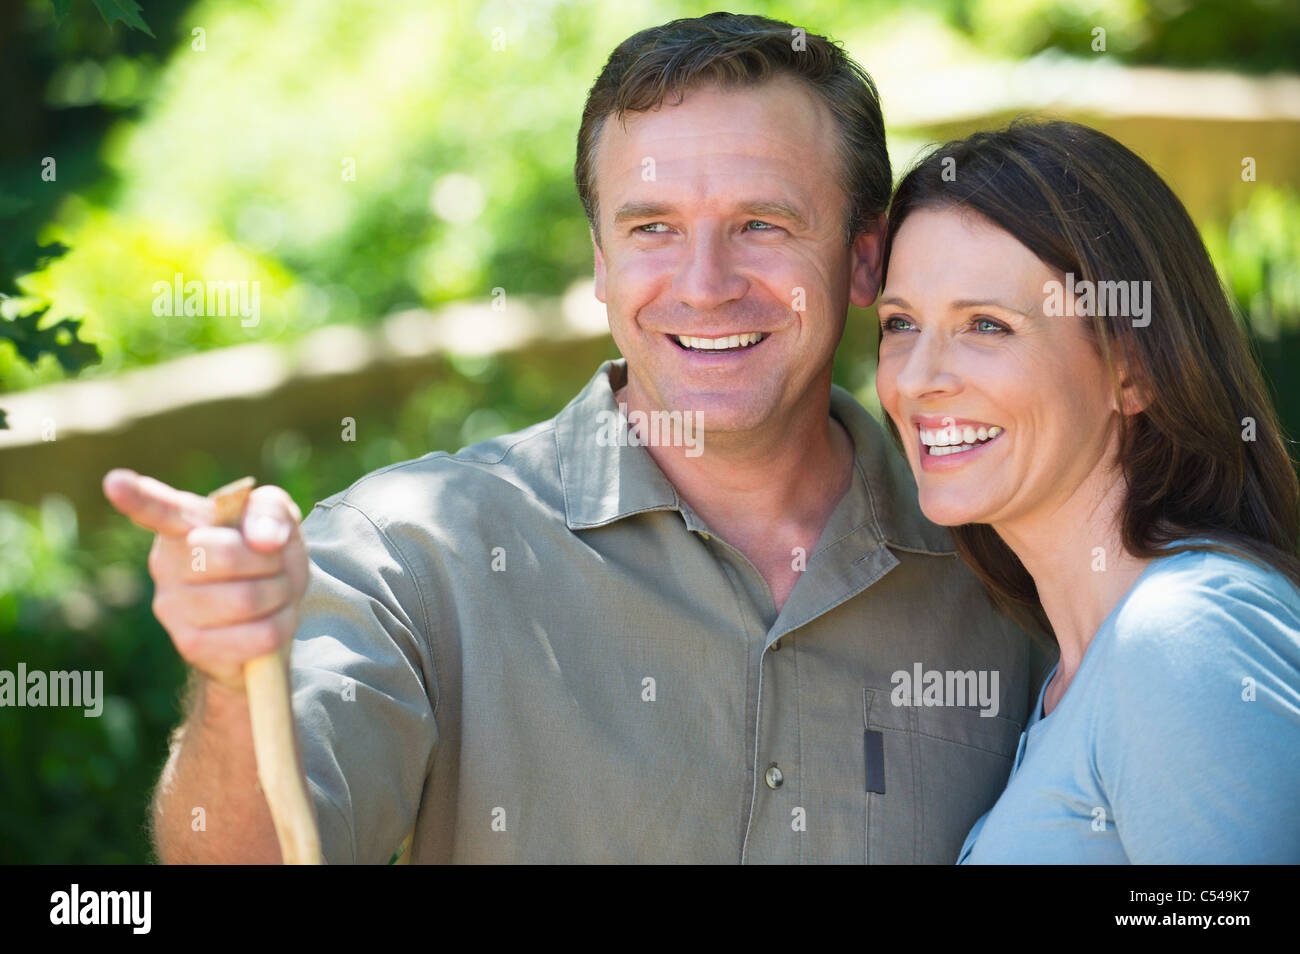 Smiling Man Showing Something To His Wife Outdoors Stock Photo Alamy